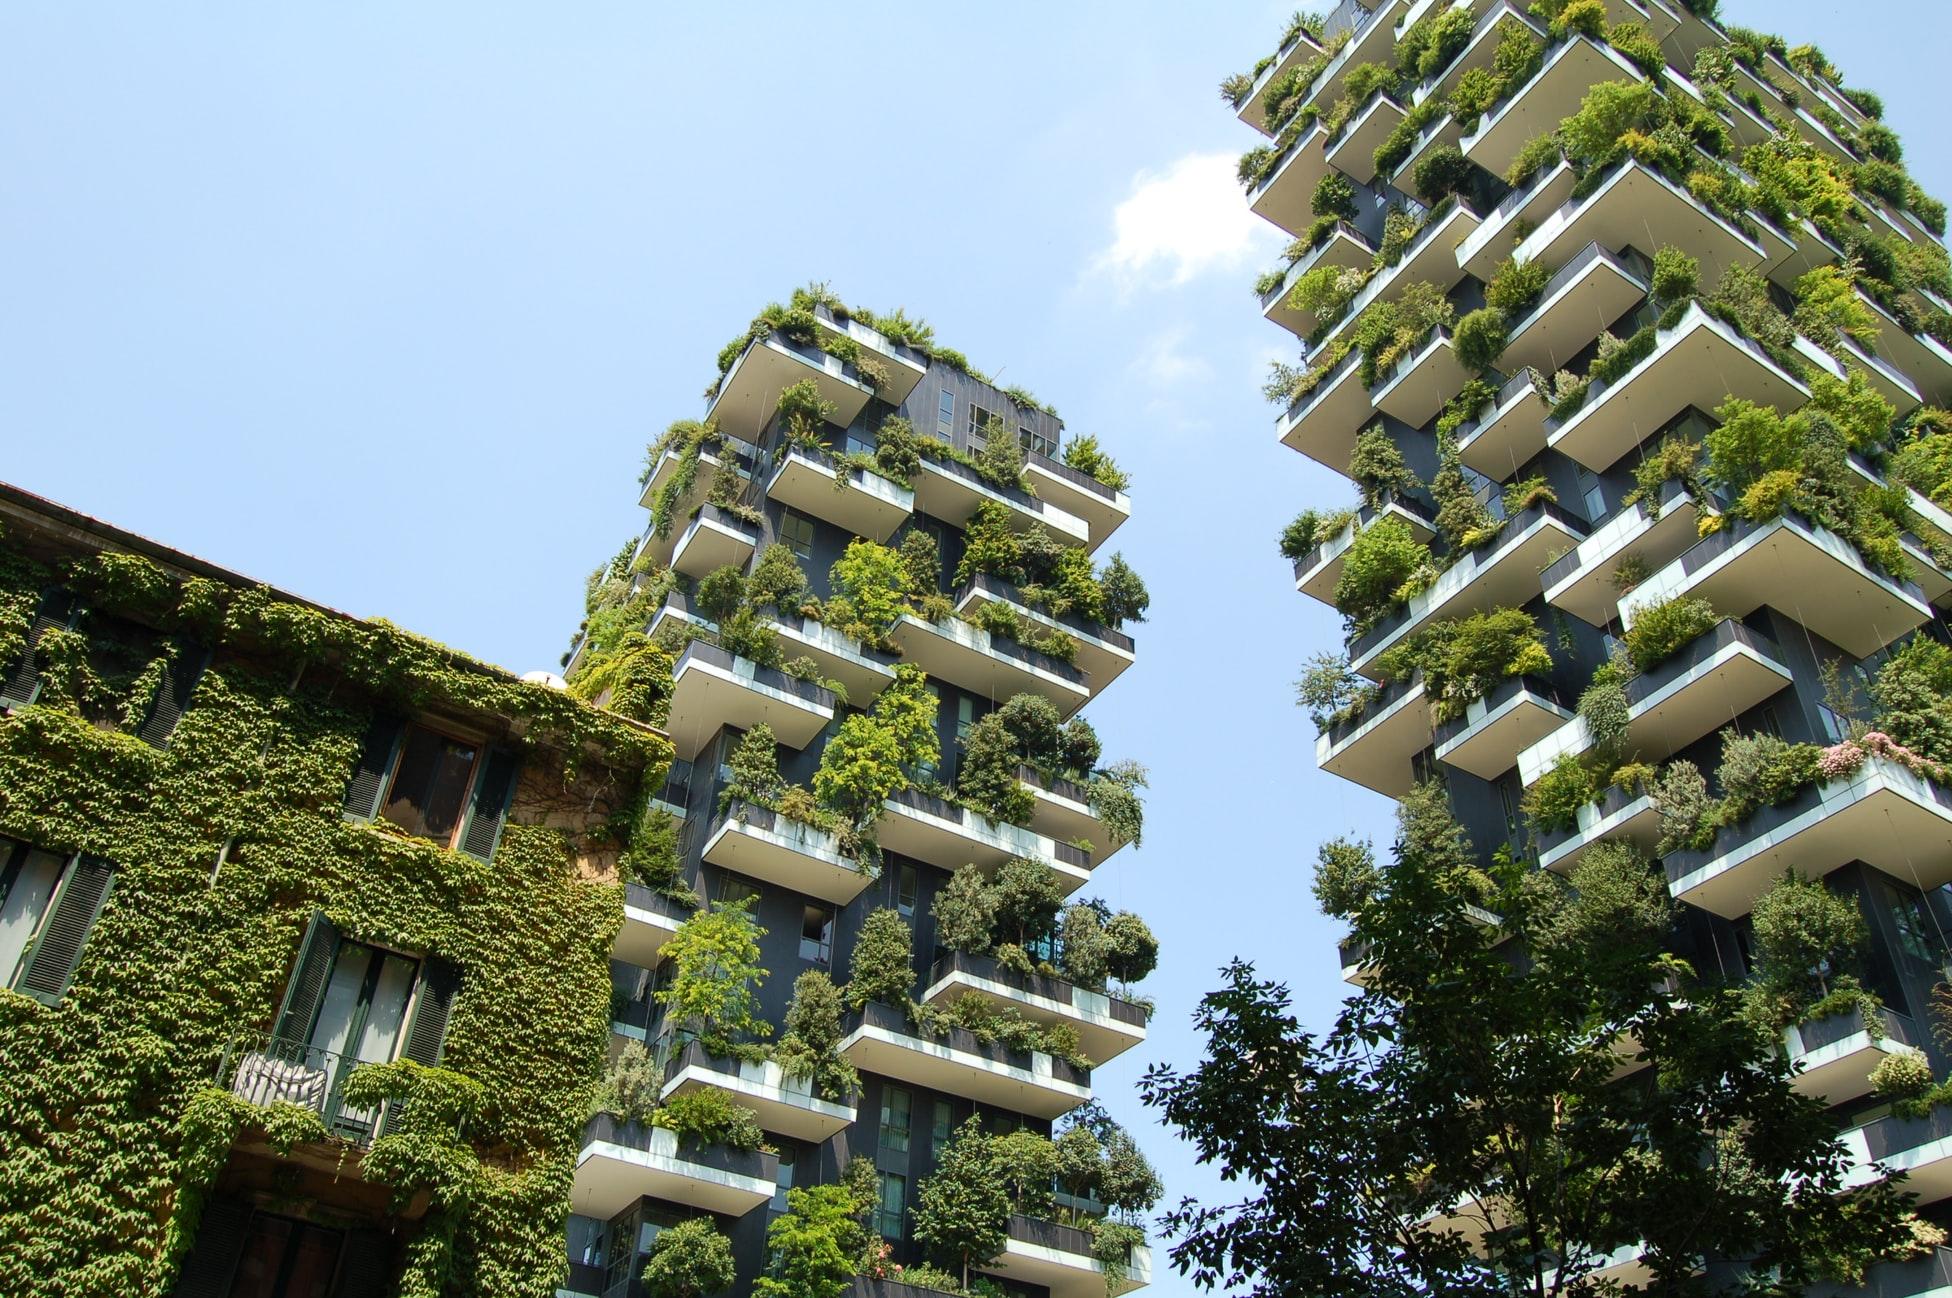 Sustainable design - office buildings